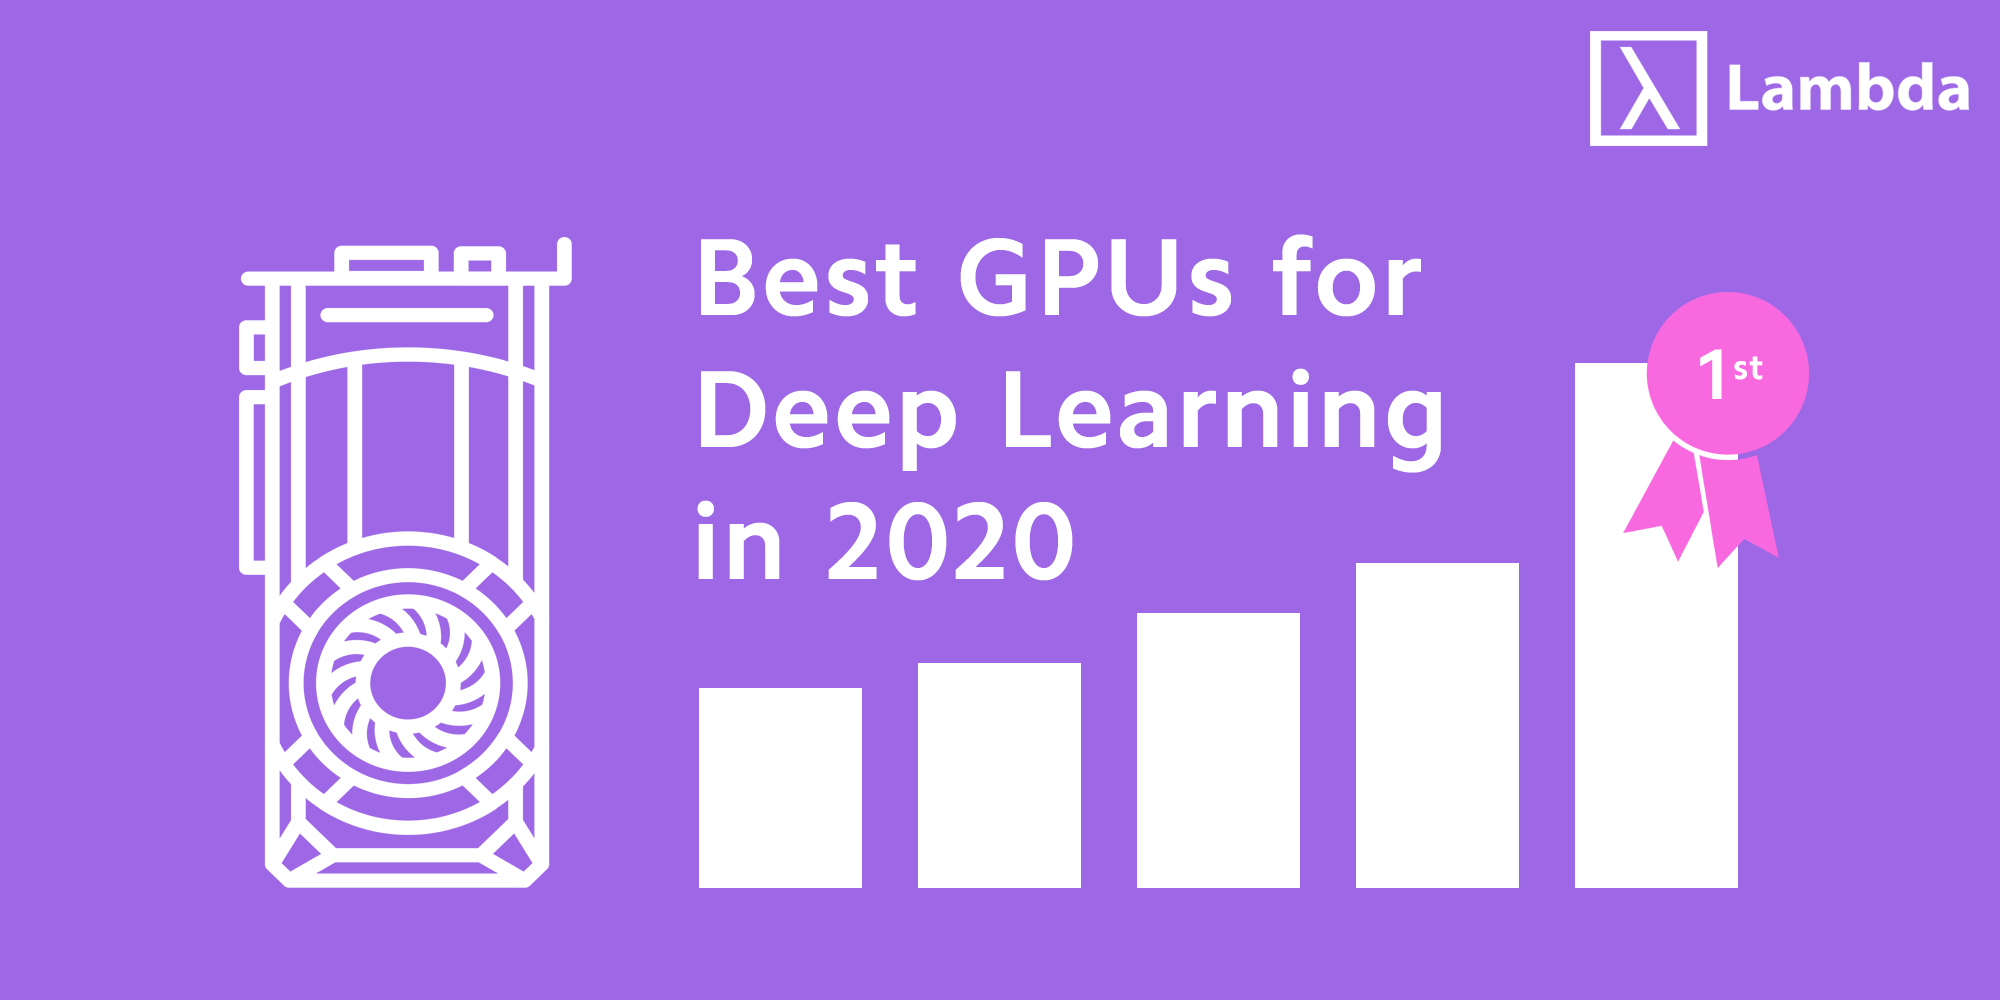 best-gpus-for-deep-learning-2020